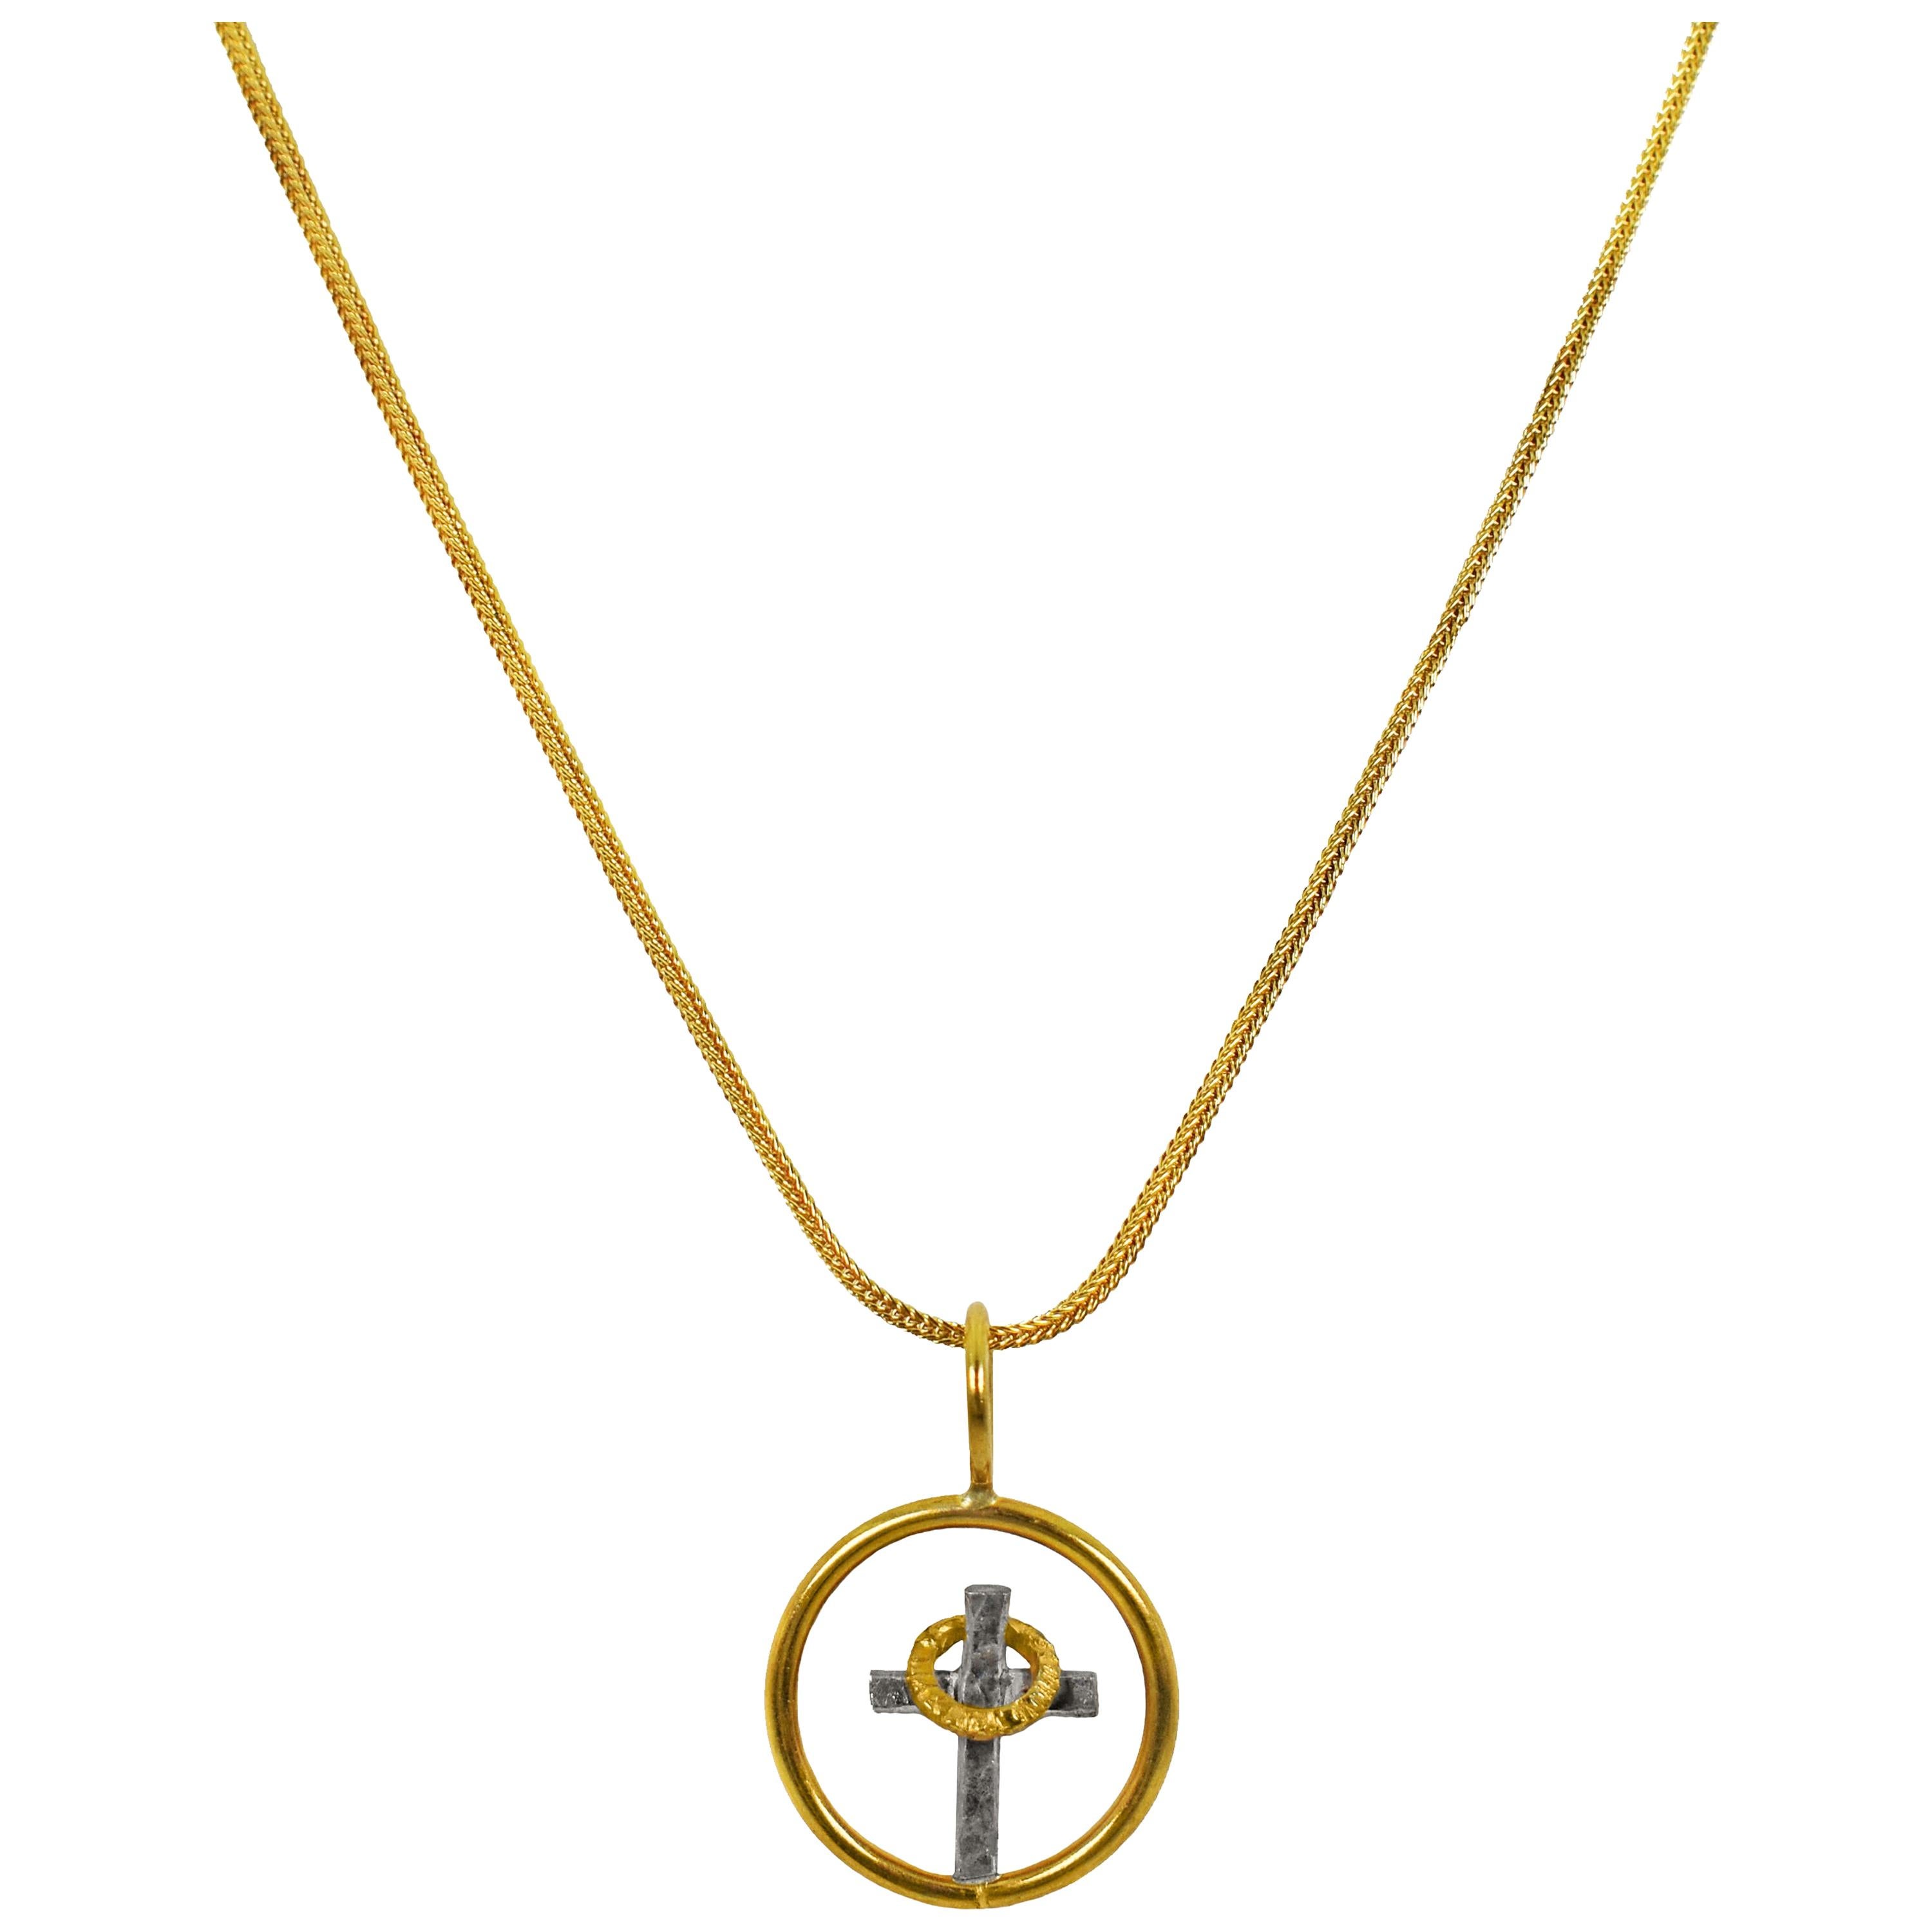 God So Loved the World, Stories in a Circle 22k Gold Two-Tone Pendant Necklace For Sale